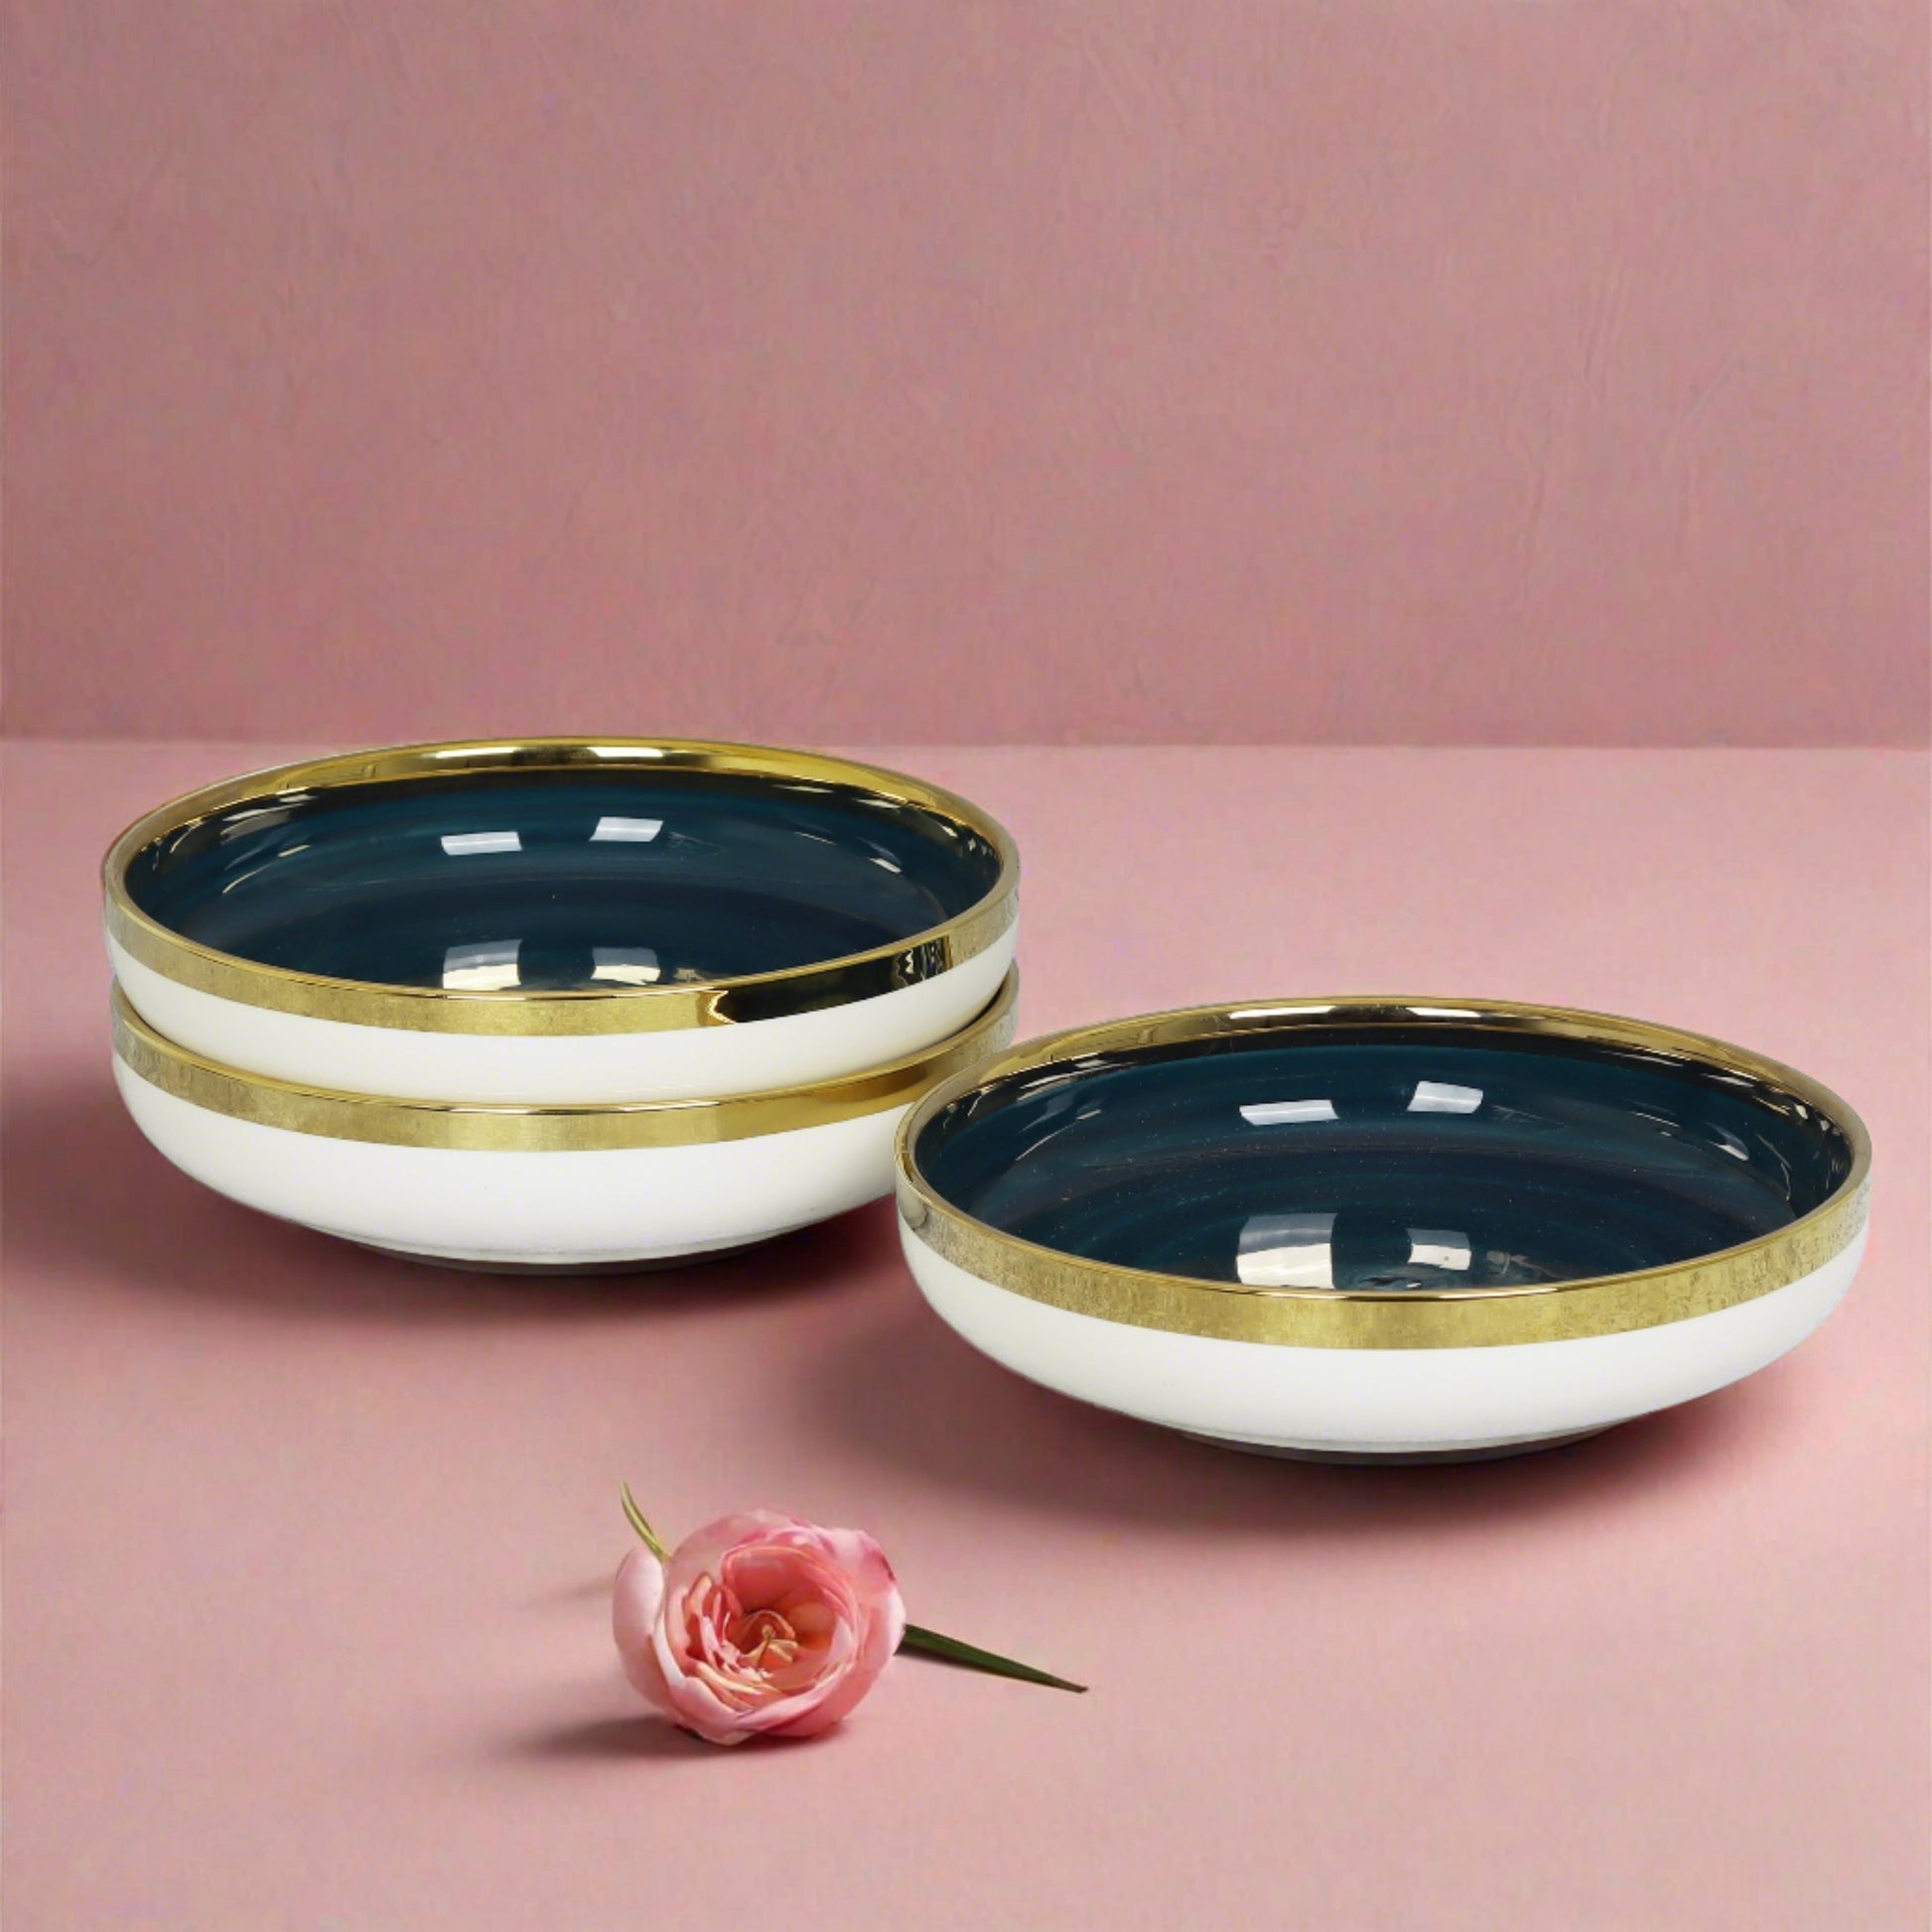 Complete ceramic pasta bowl set - perfect for serving and enjoying pasta dishes.